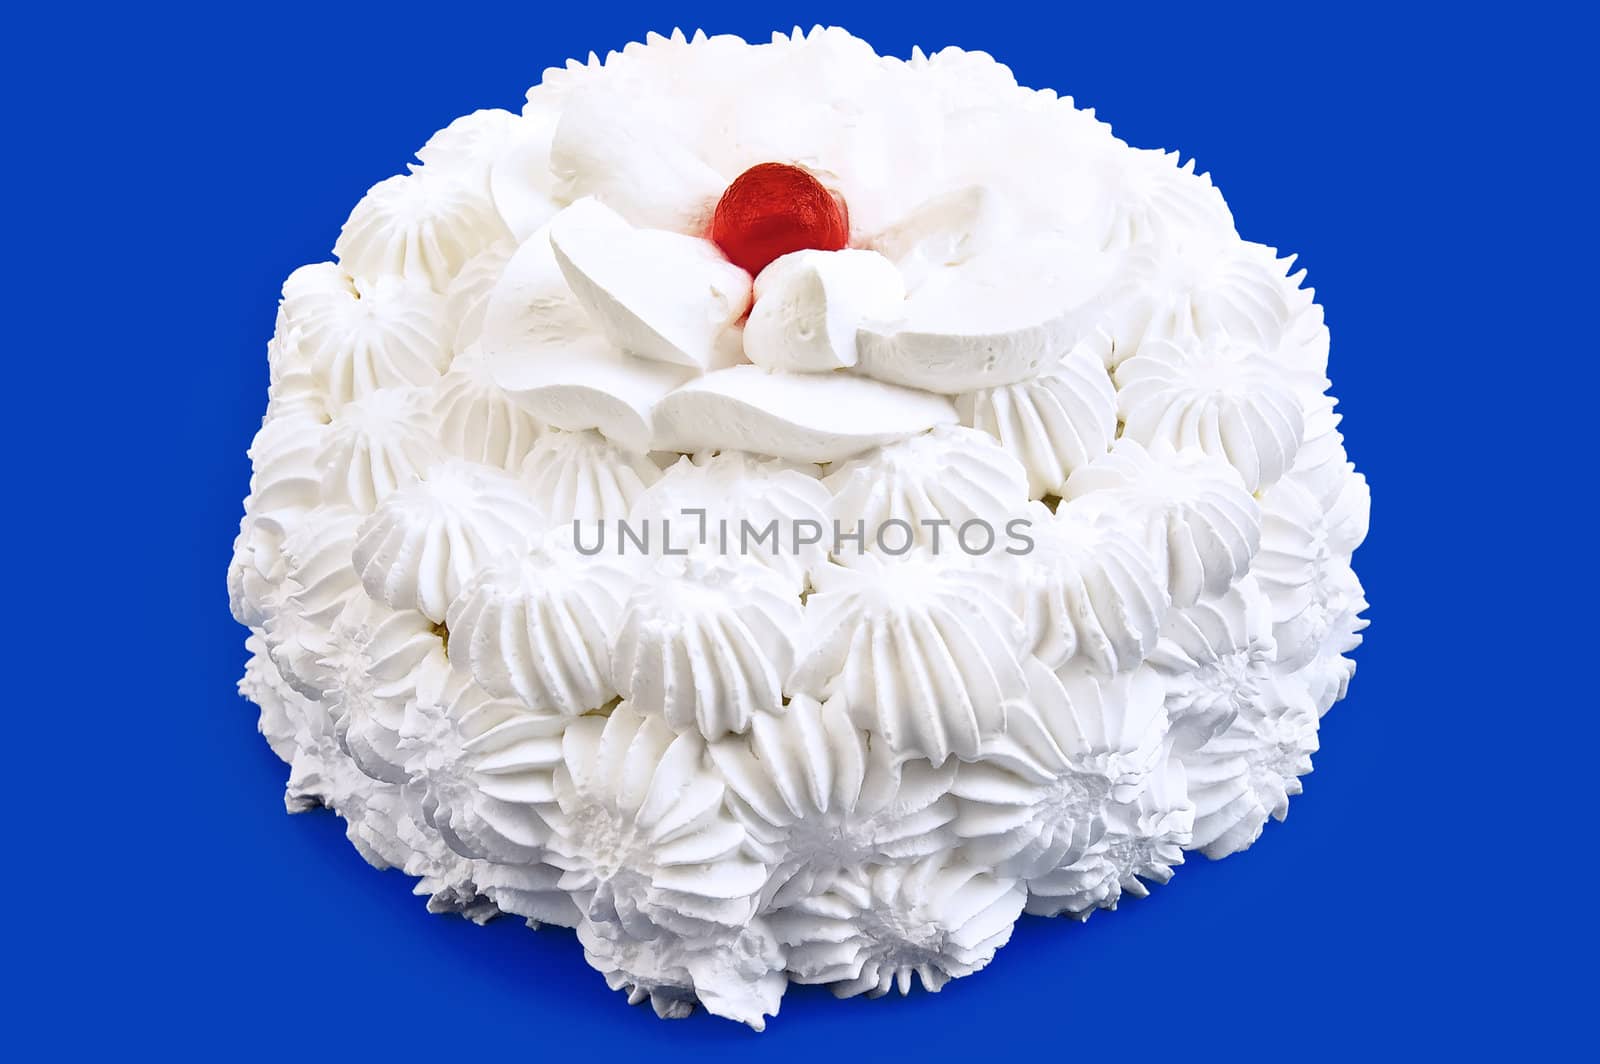 Round sponge cake with white cream and red air scoop the jelly on a blue background